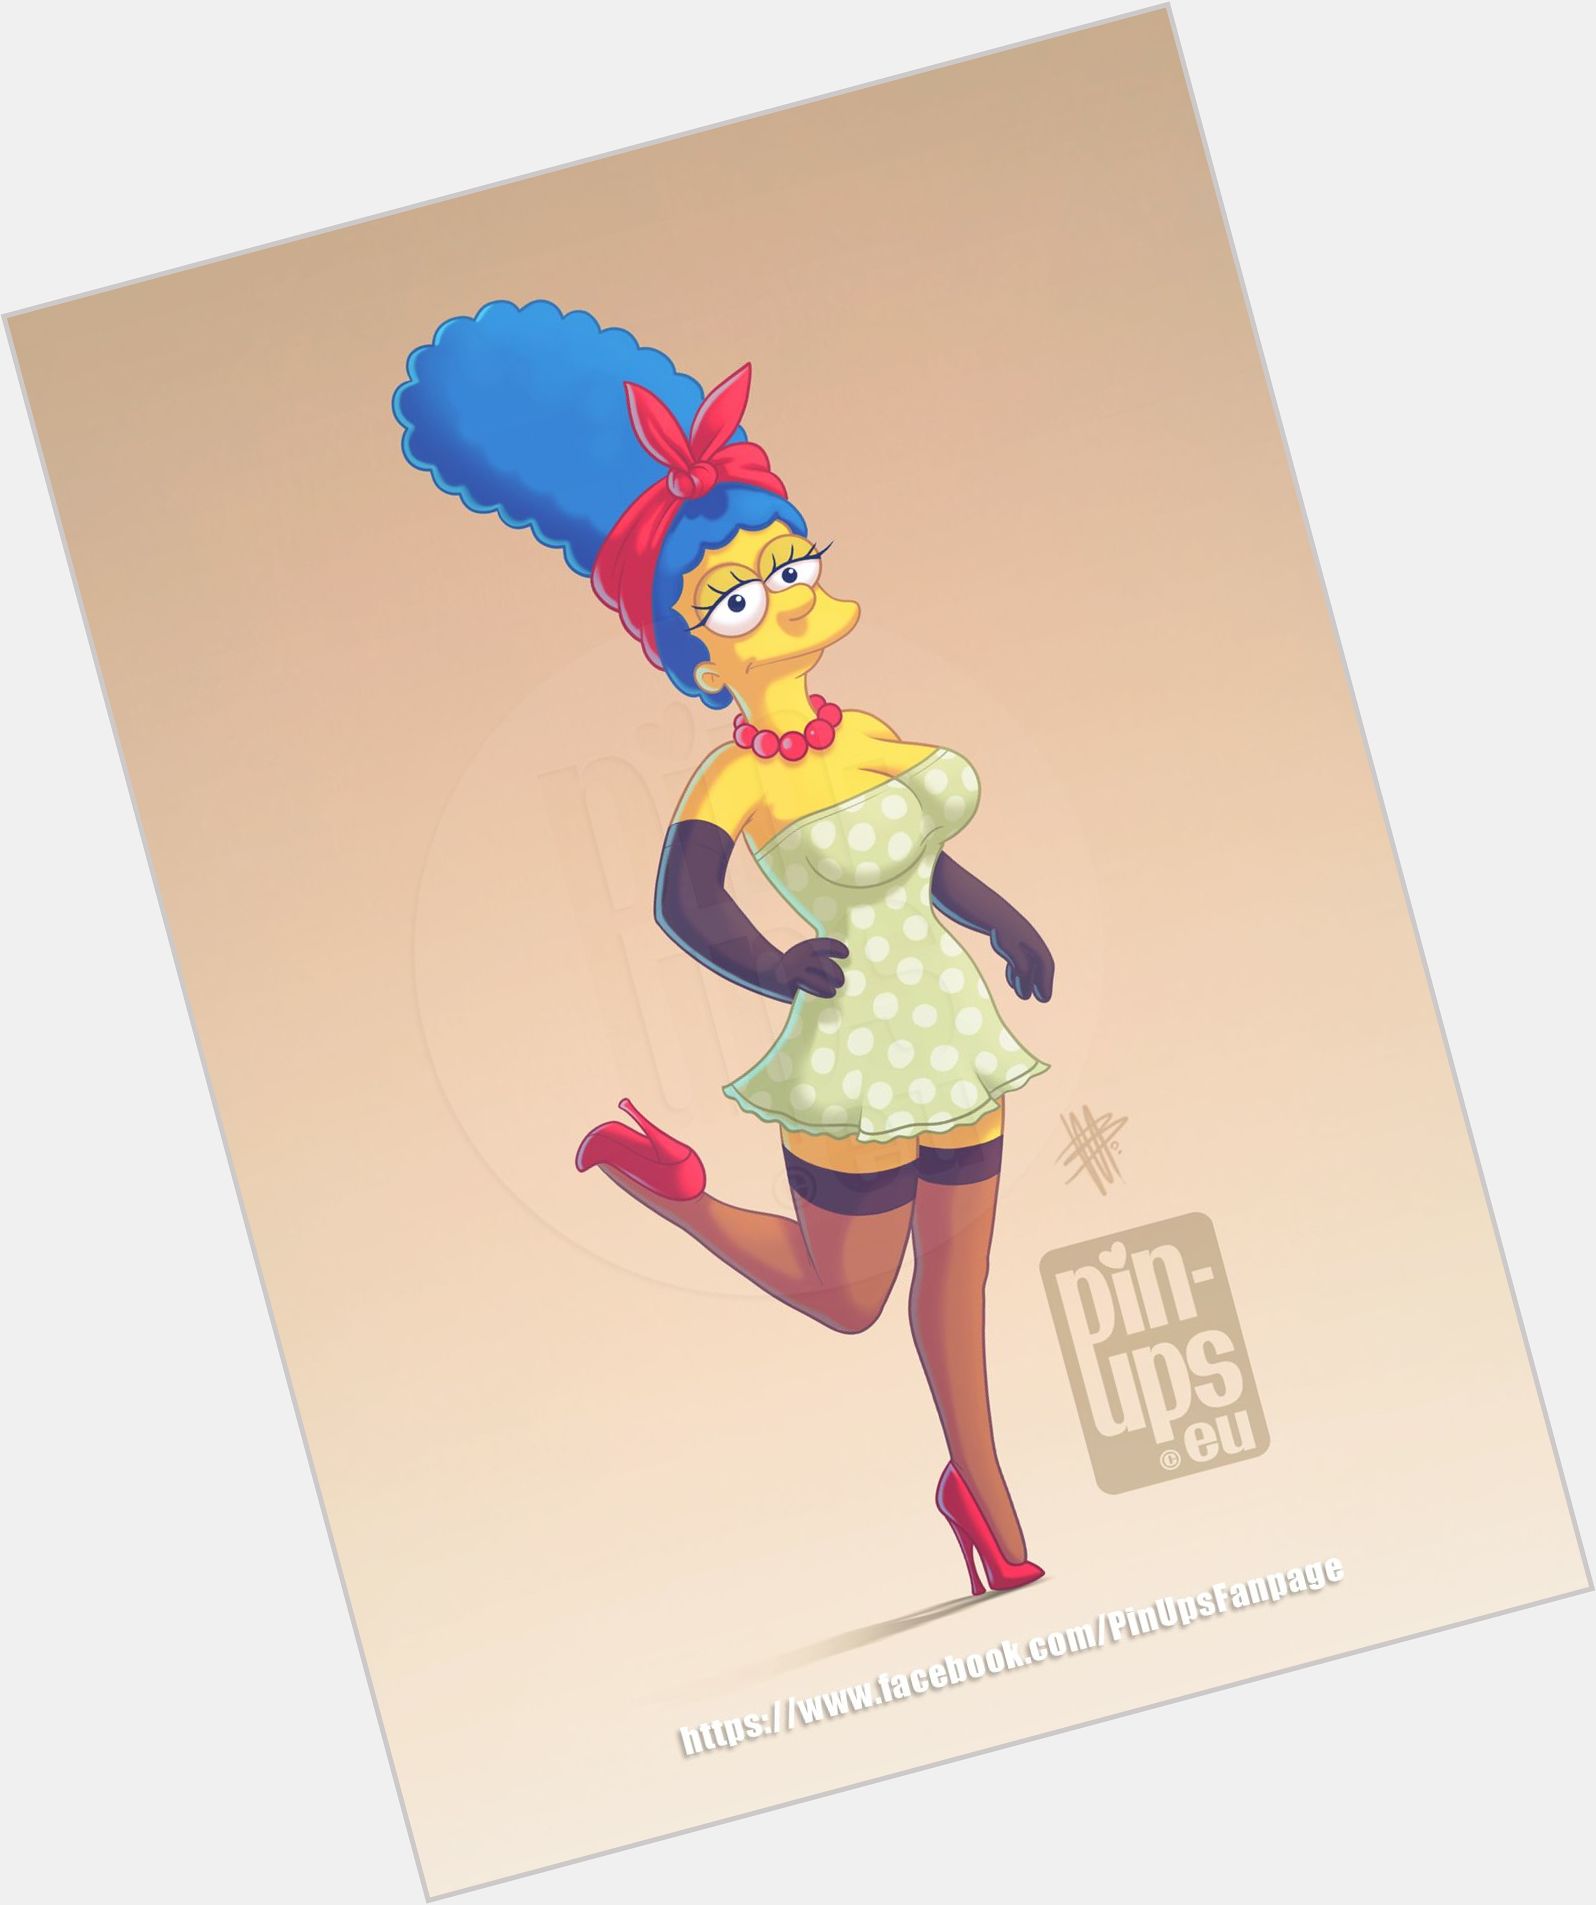 Https://fanpagepress.net/m/M/Marge Simpson New Pic 7